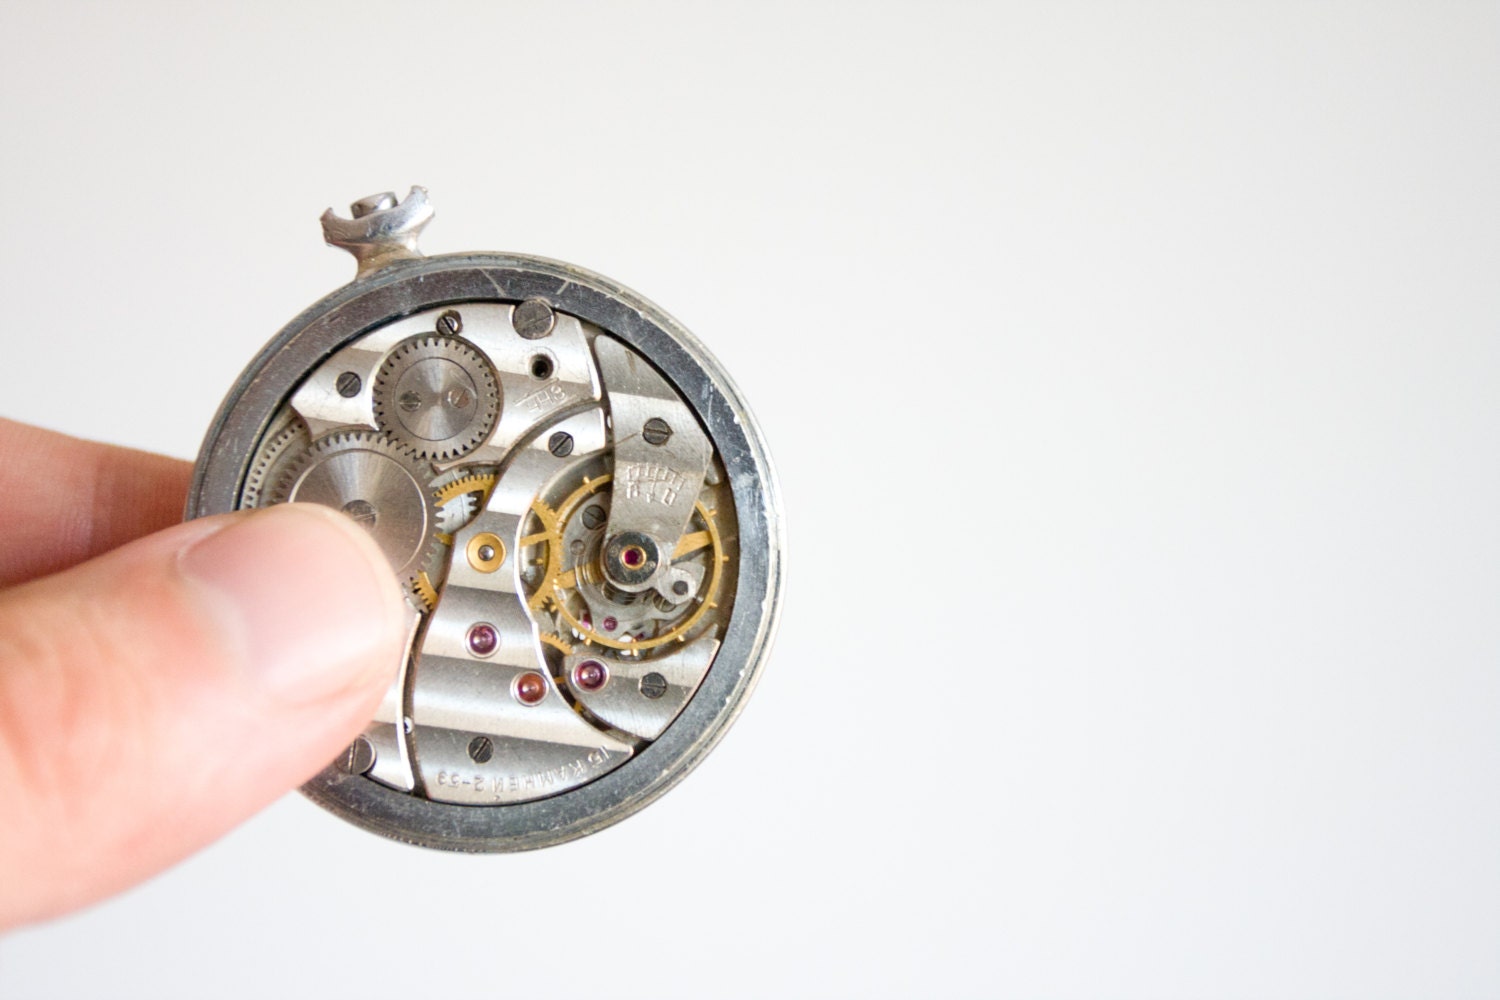 Chronometer Stopwatch Mechanism, Steam Punk Parts,  Watch Parts, Soviet Pocket Watch, Recycle, Modern, ohtteam - TheThingsThatWere